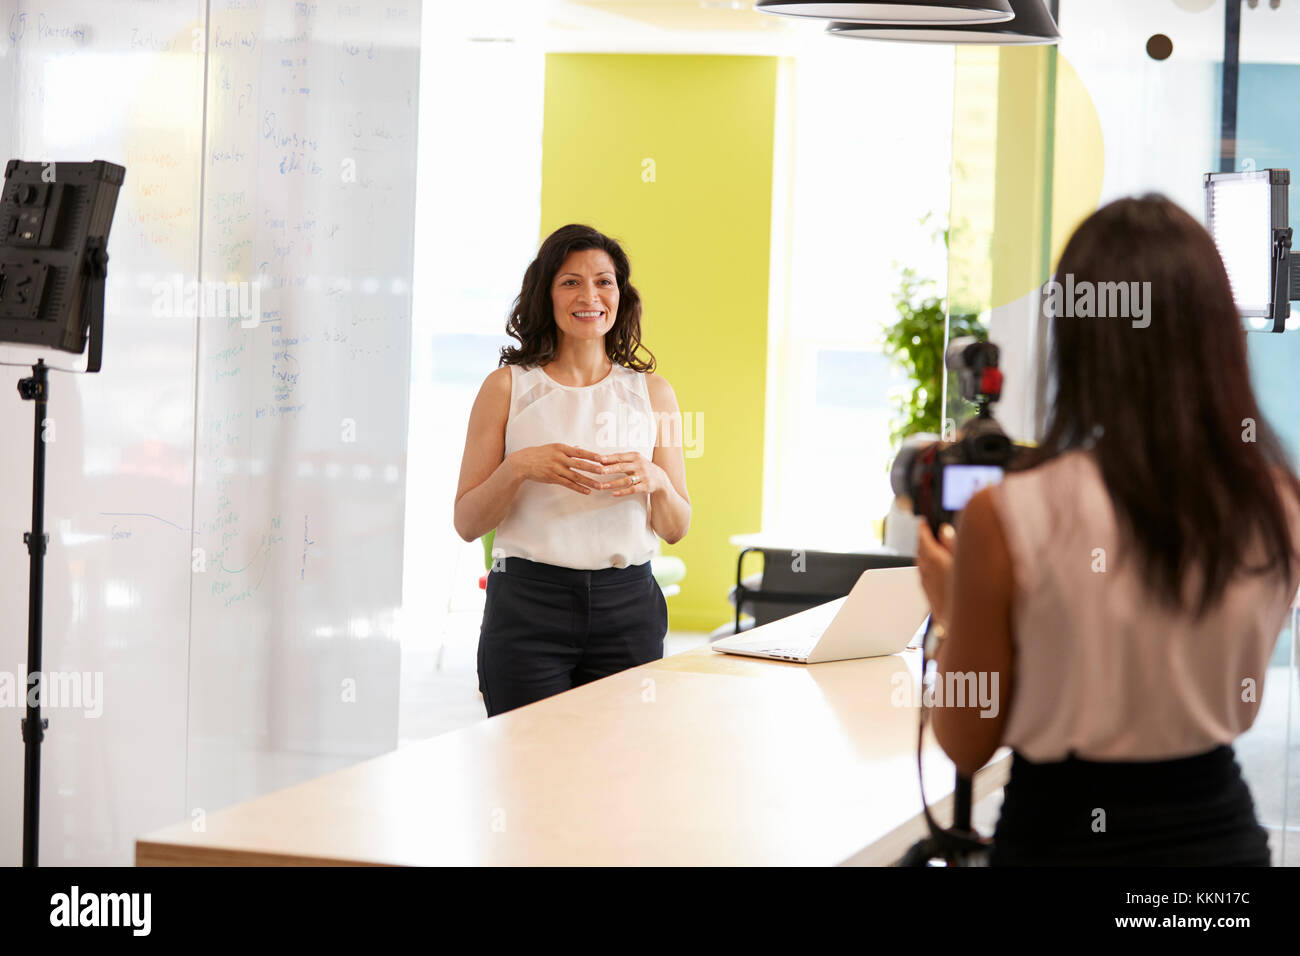 Two women filming a corporate demonstration video Stock Photo